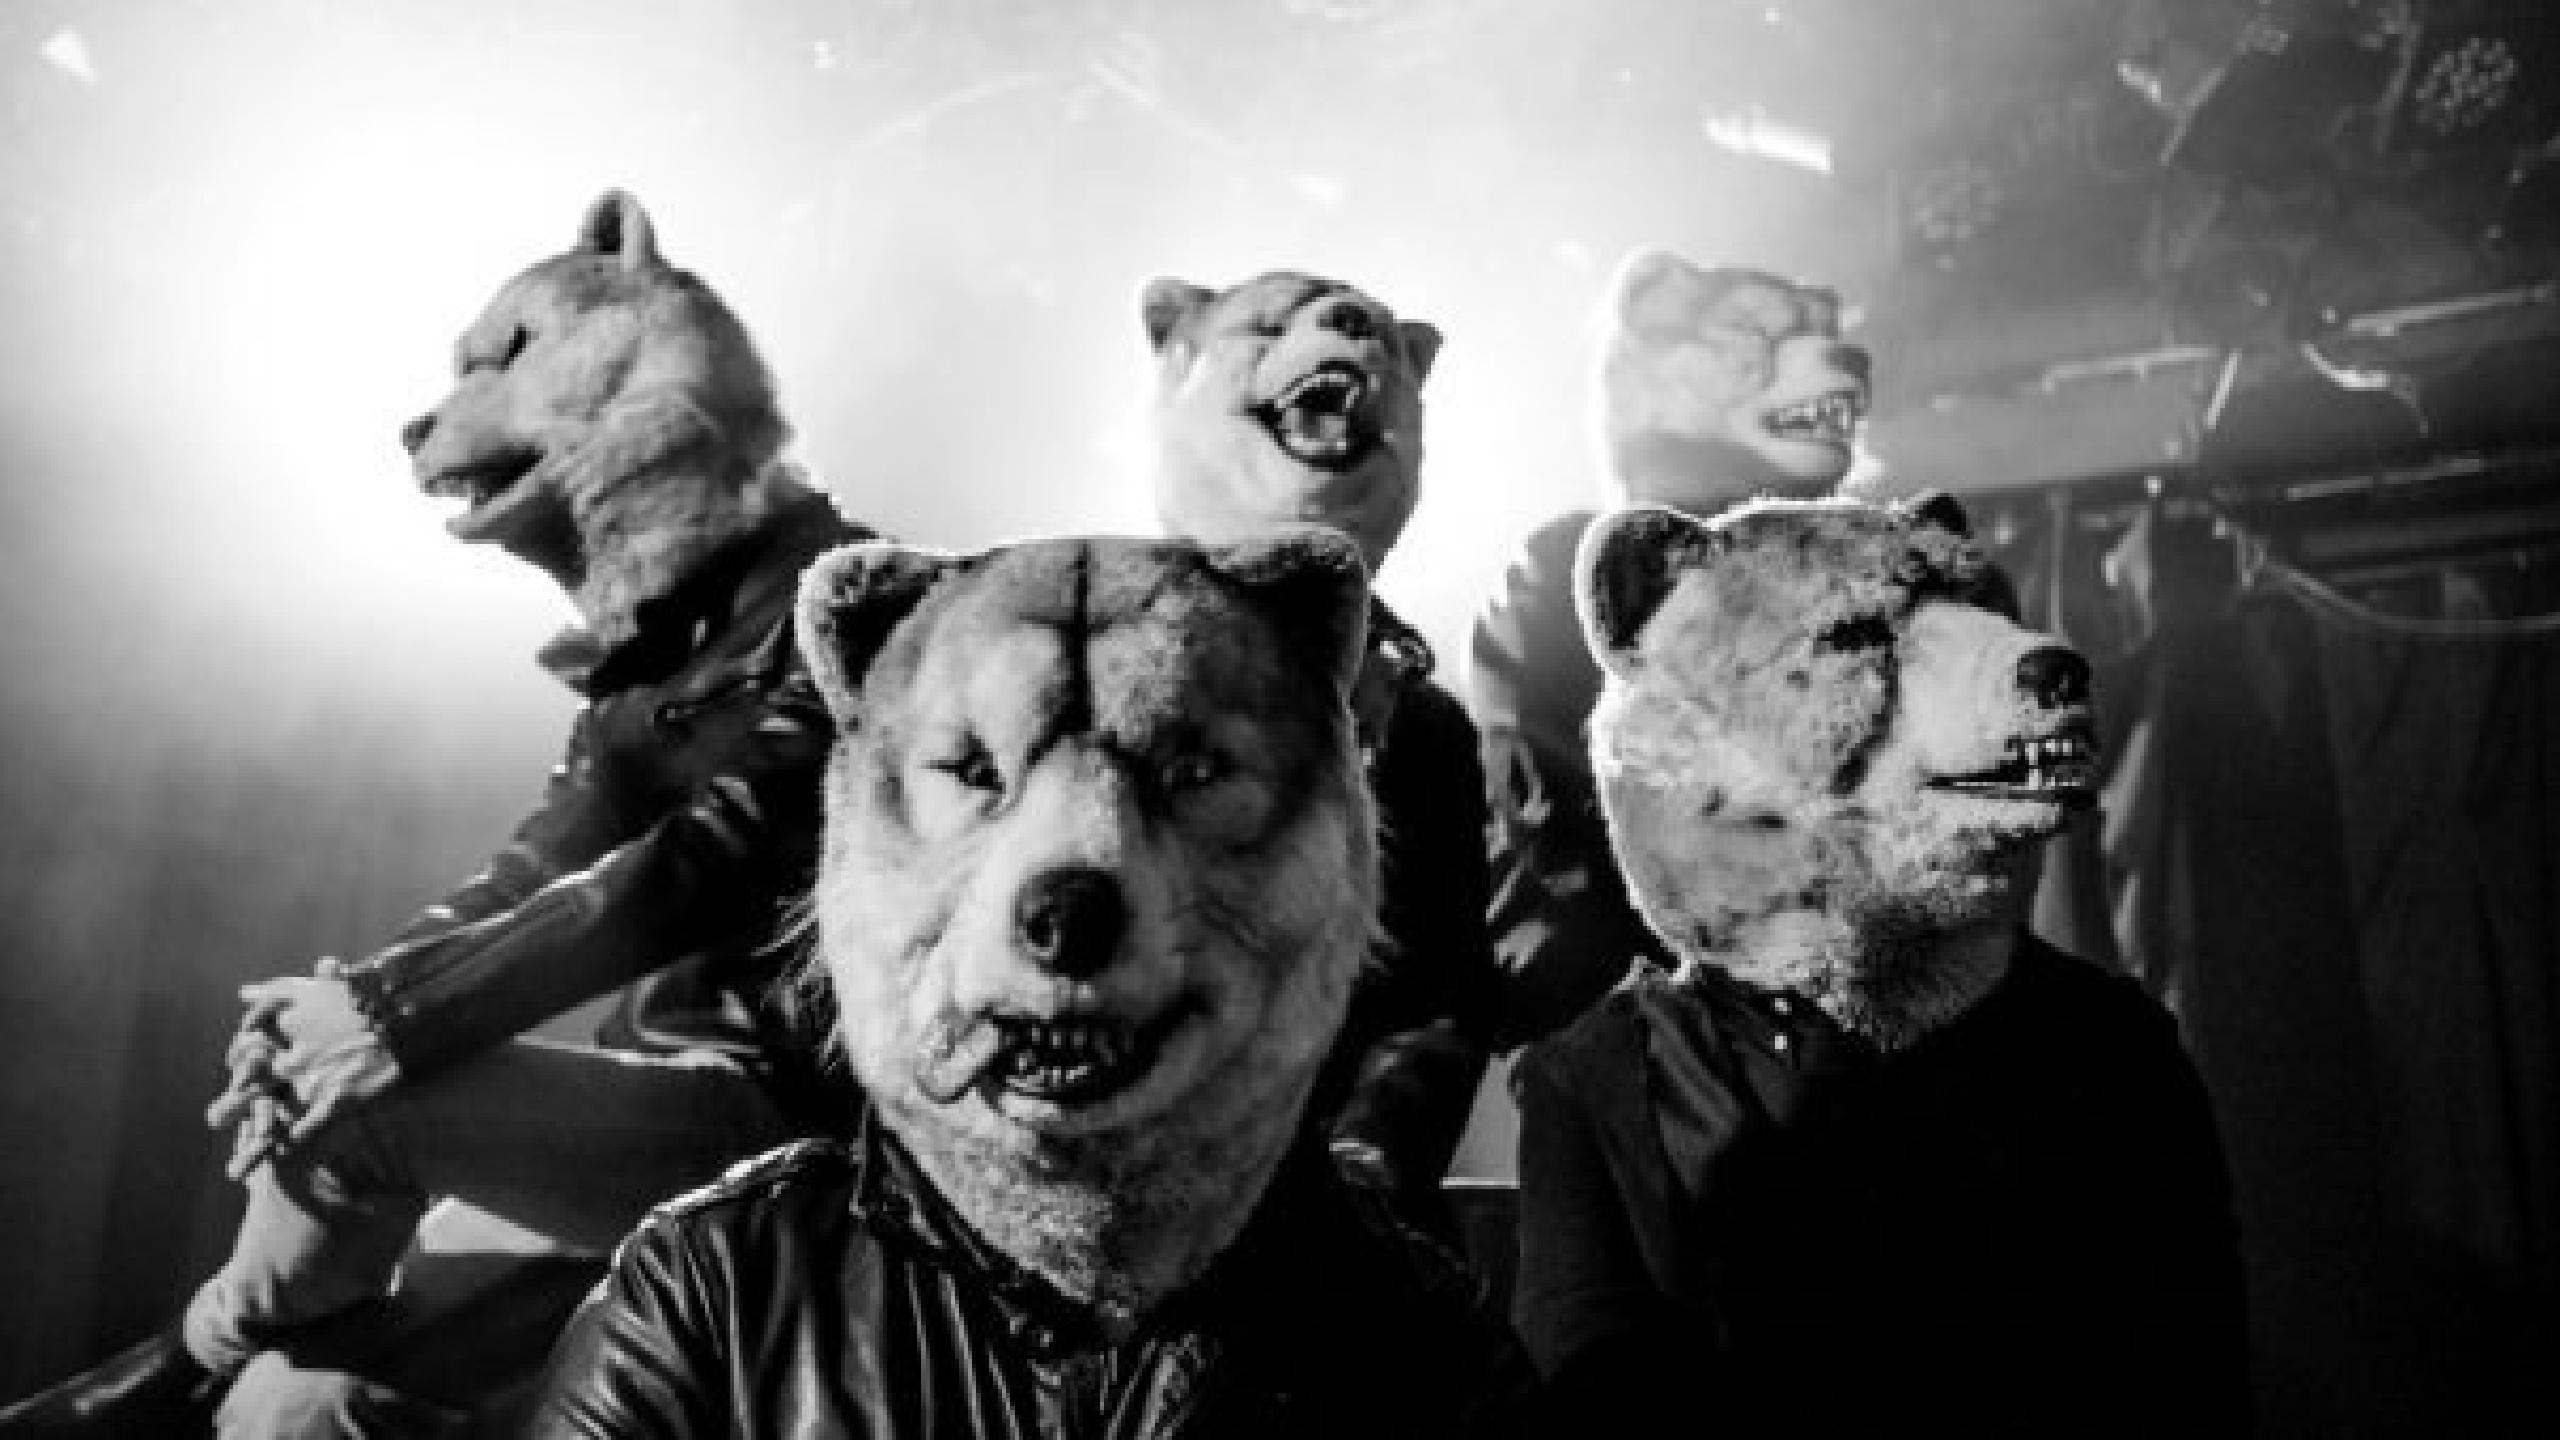 Man With A Mission Tour Dates 22 23 Man With A Mission Tickets And Concerts Wegow United States